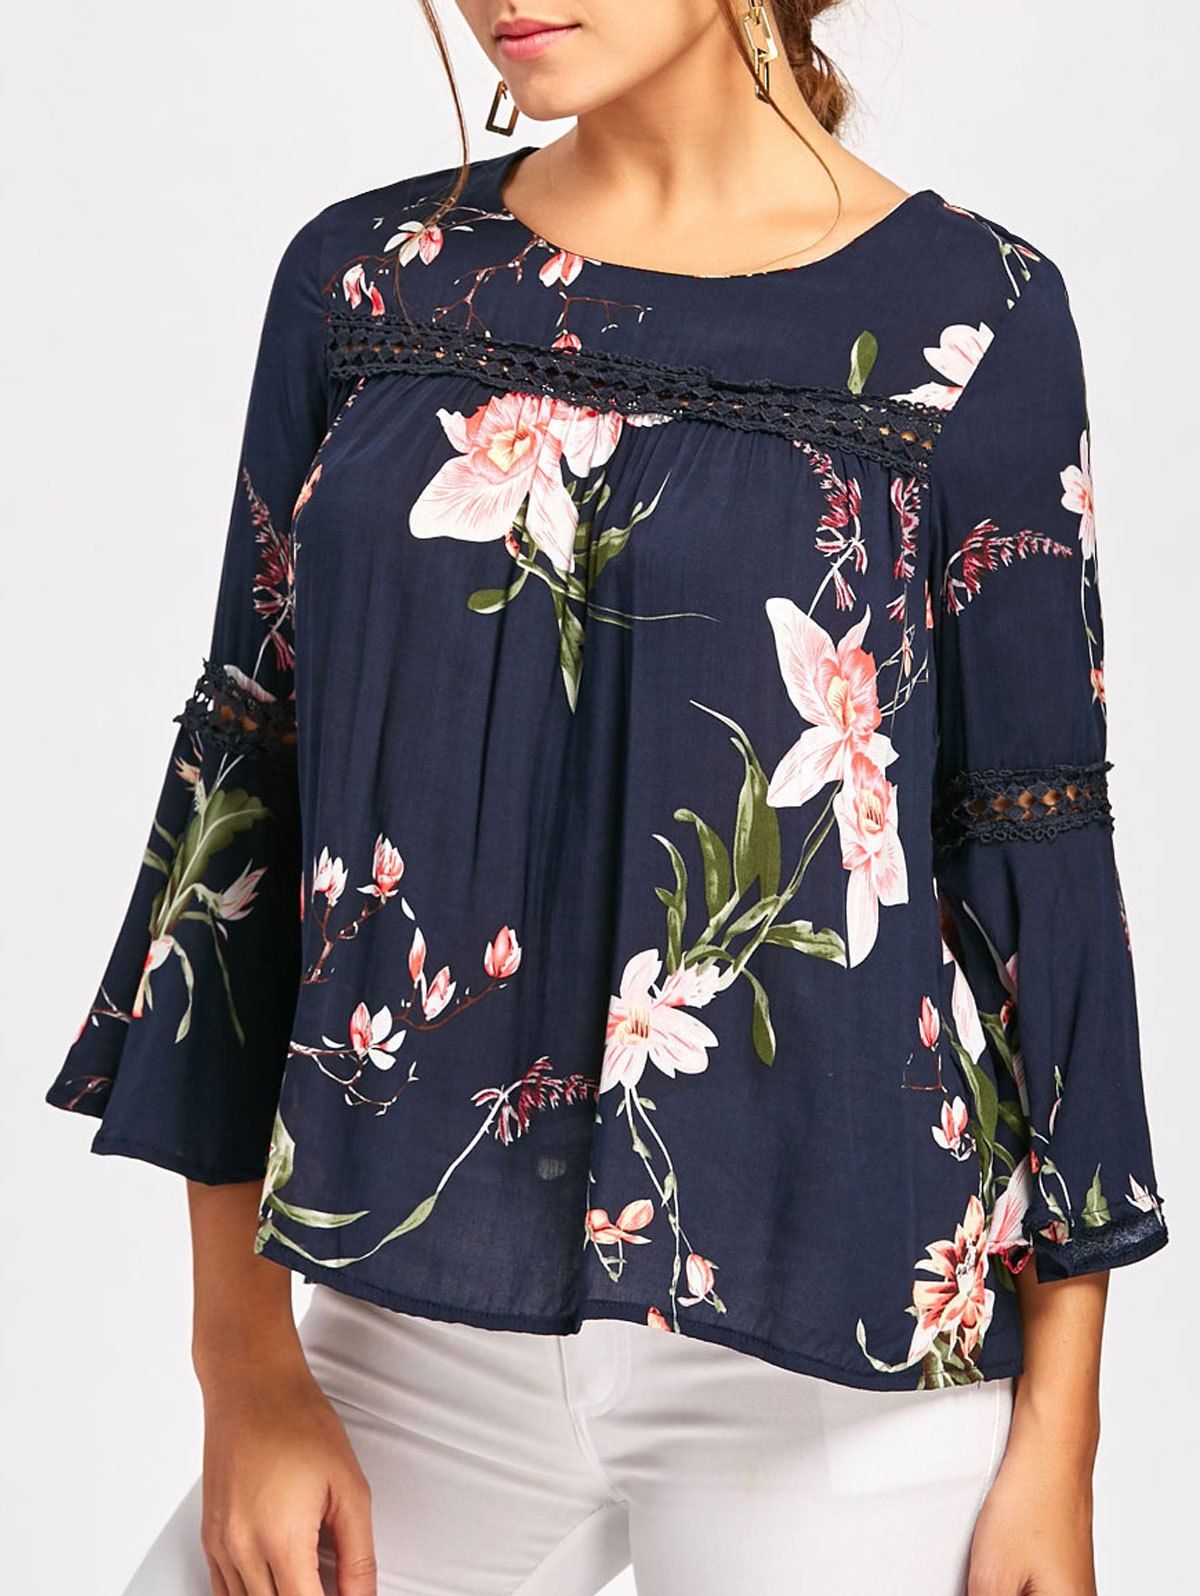 Chic Floral Print Lace Insert Bell Sleeve Blouse  